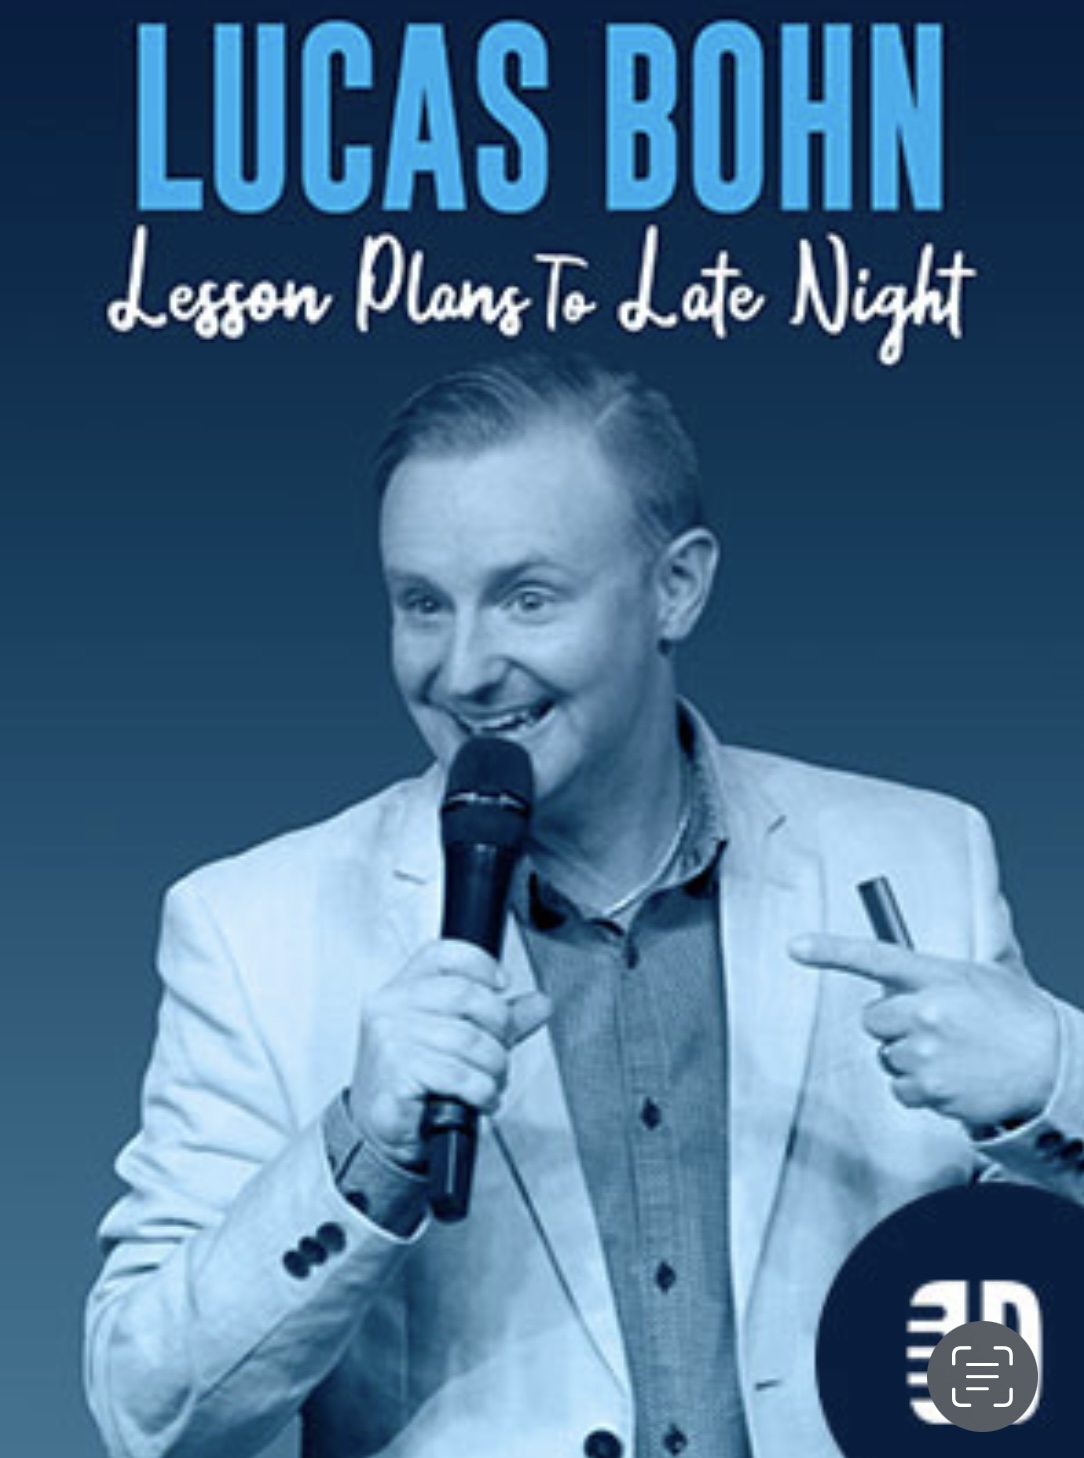 Image of Comedian with test "Lucas Bohn: Lesson Plans to Late Night"